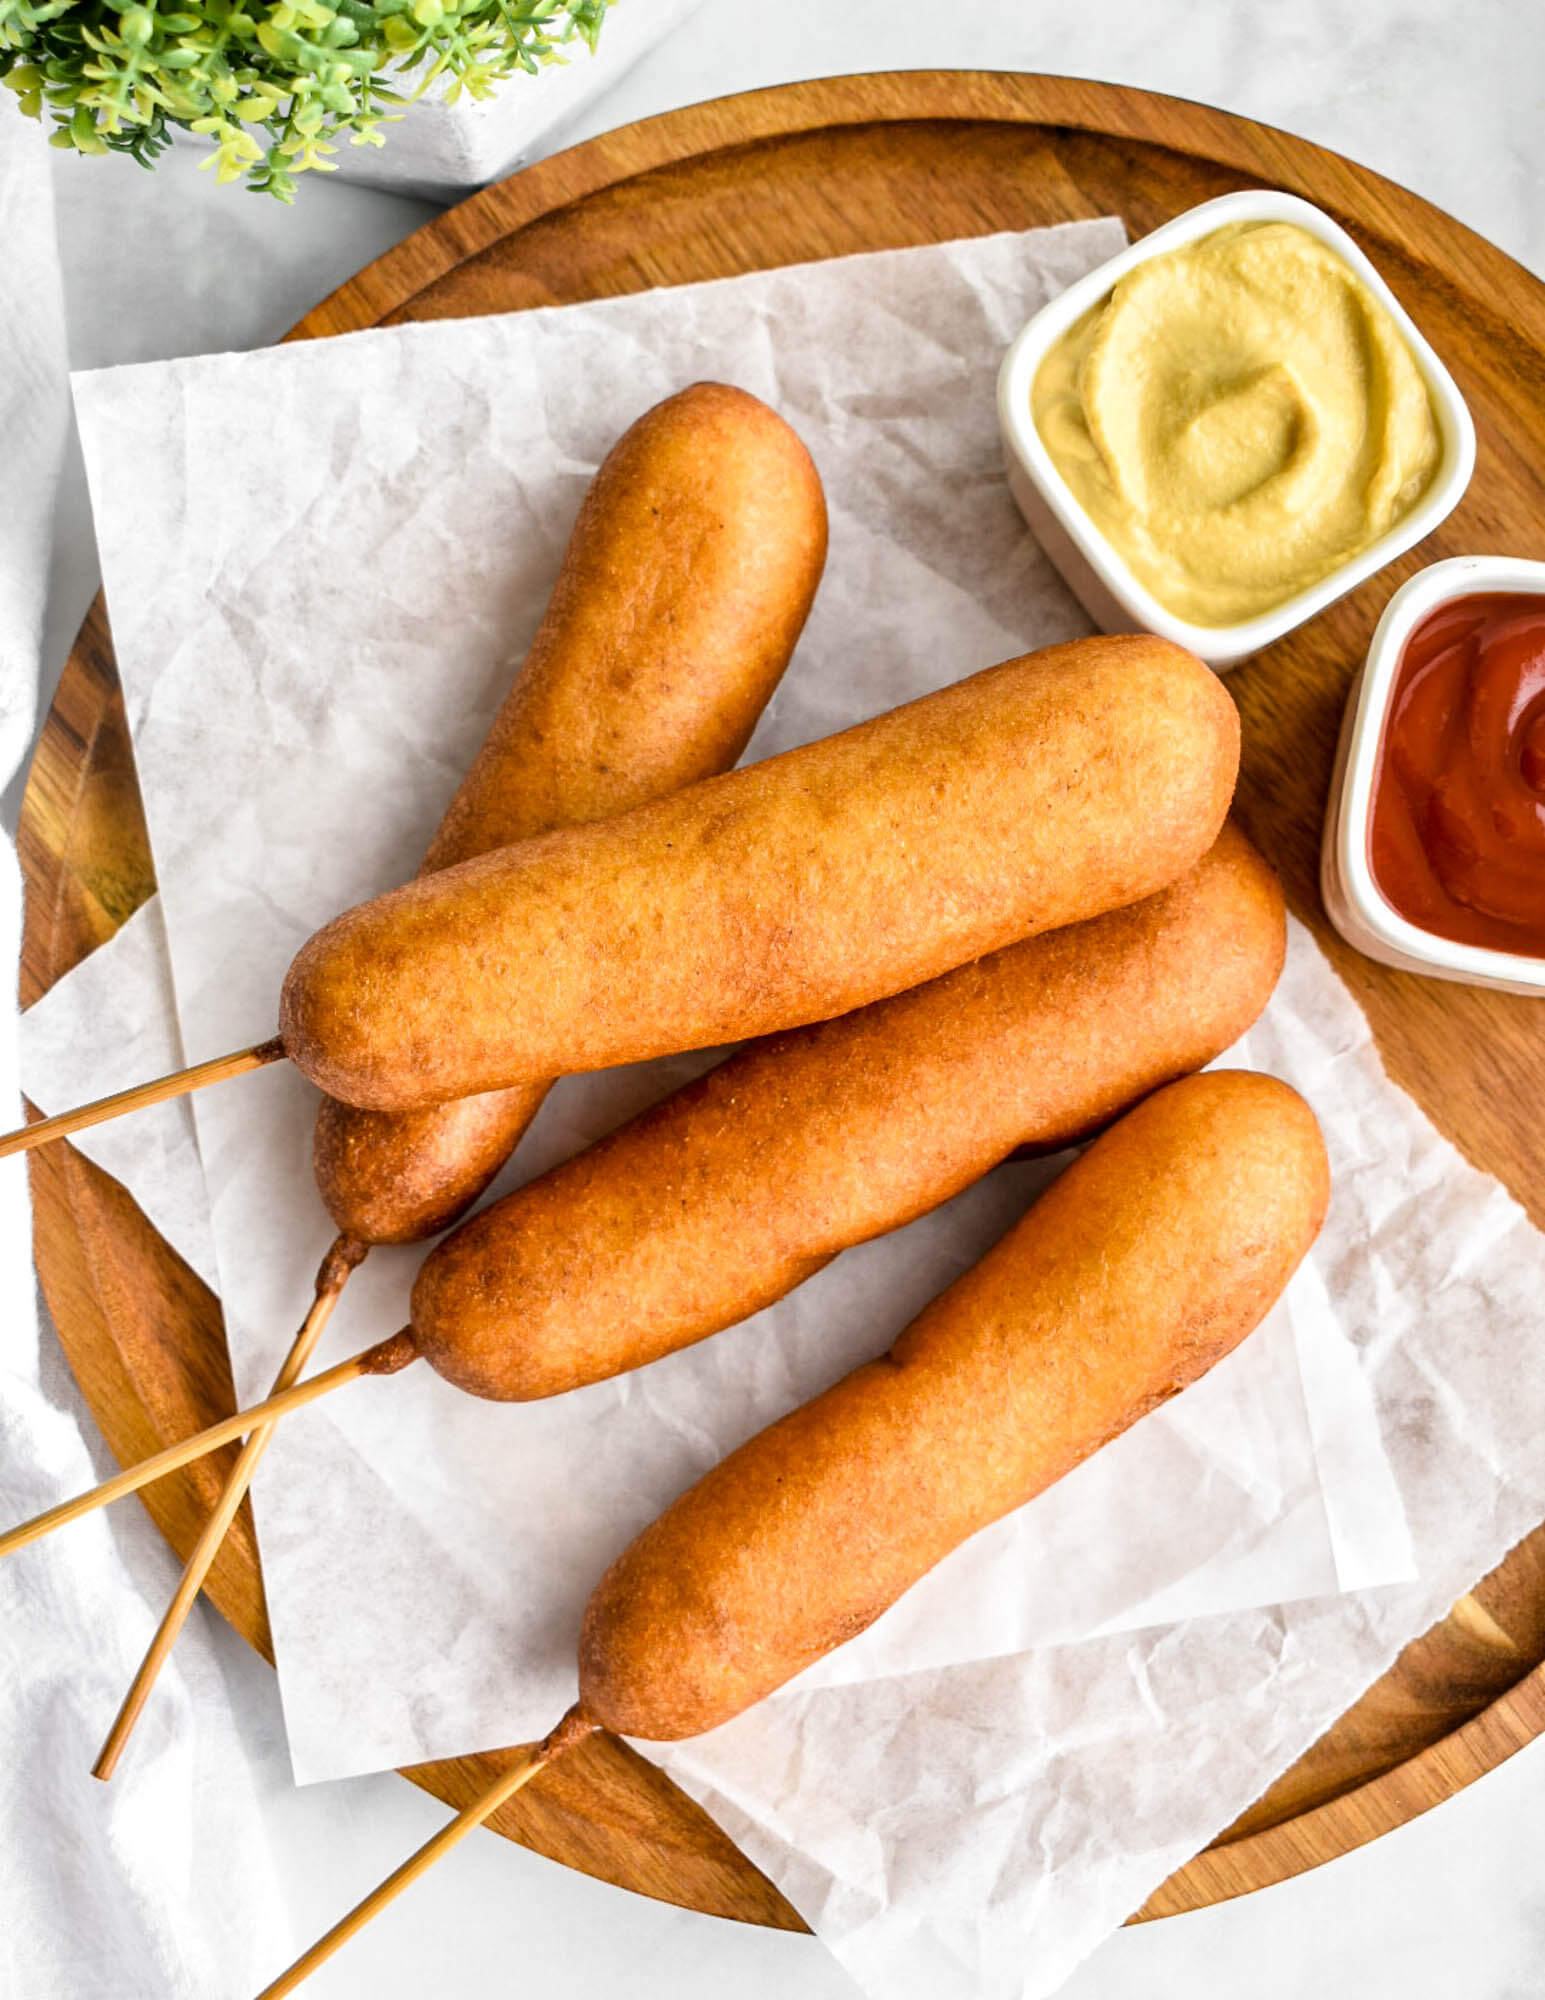 Corn dogs on a serving tray with mustard and ketchup in small prep bowls for dipping.